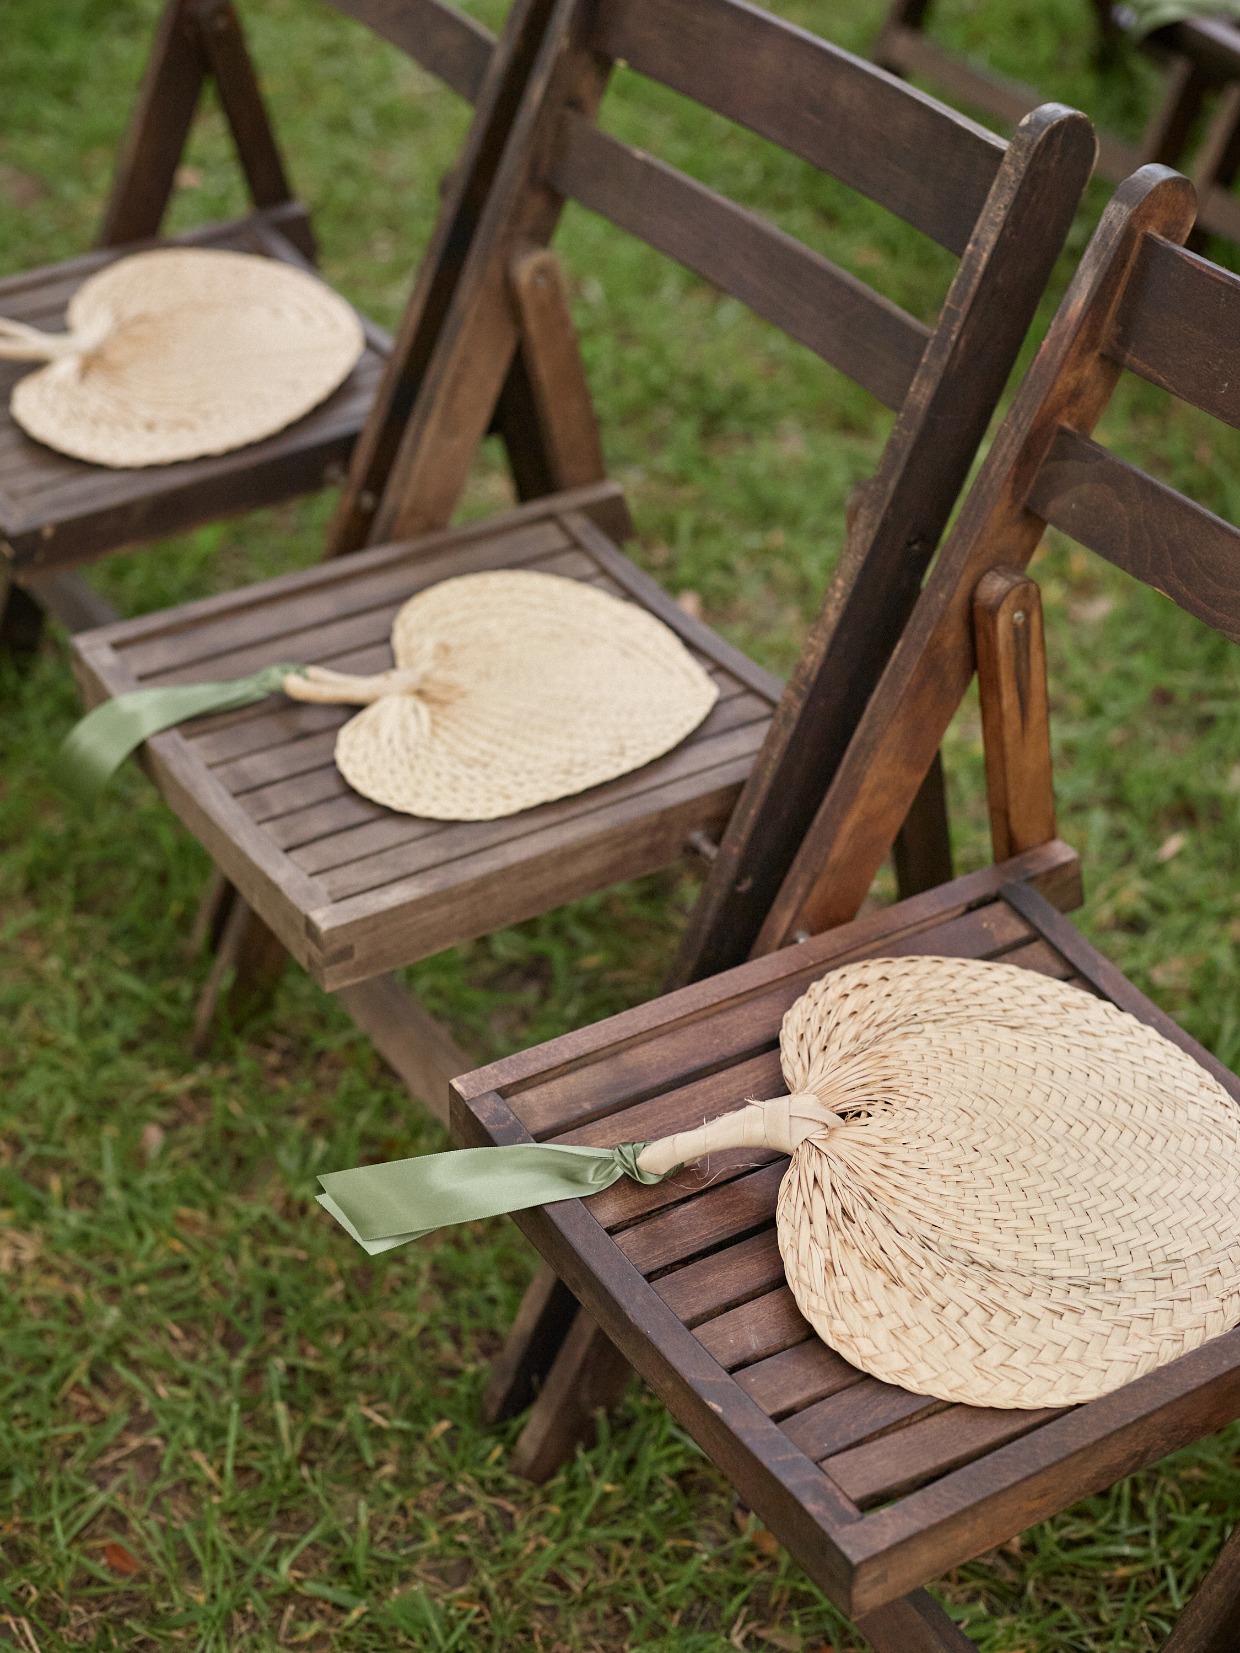 Rattan fans on ceremony chairs